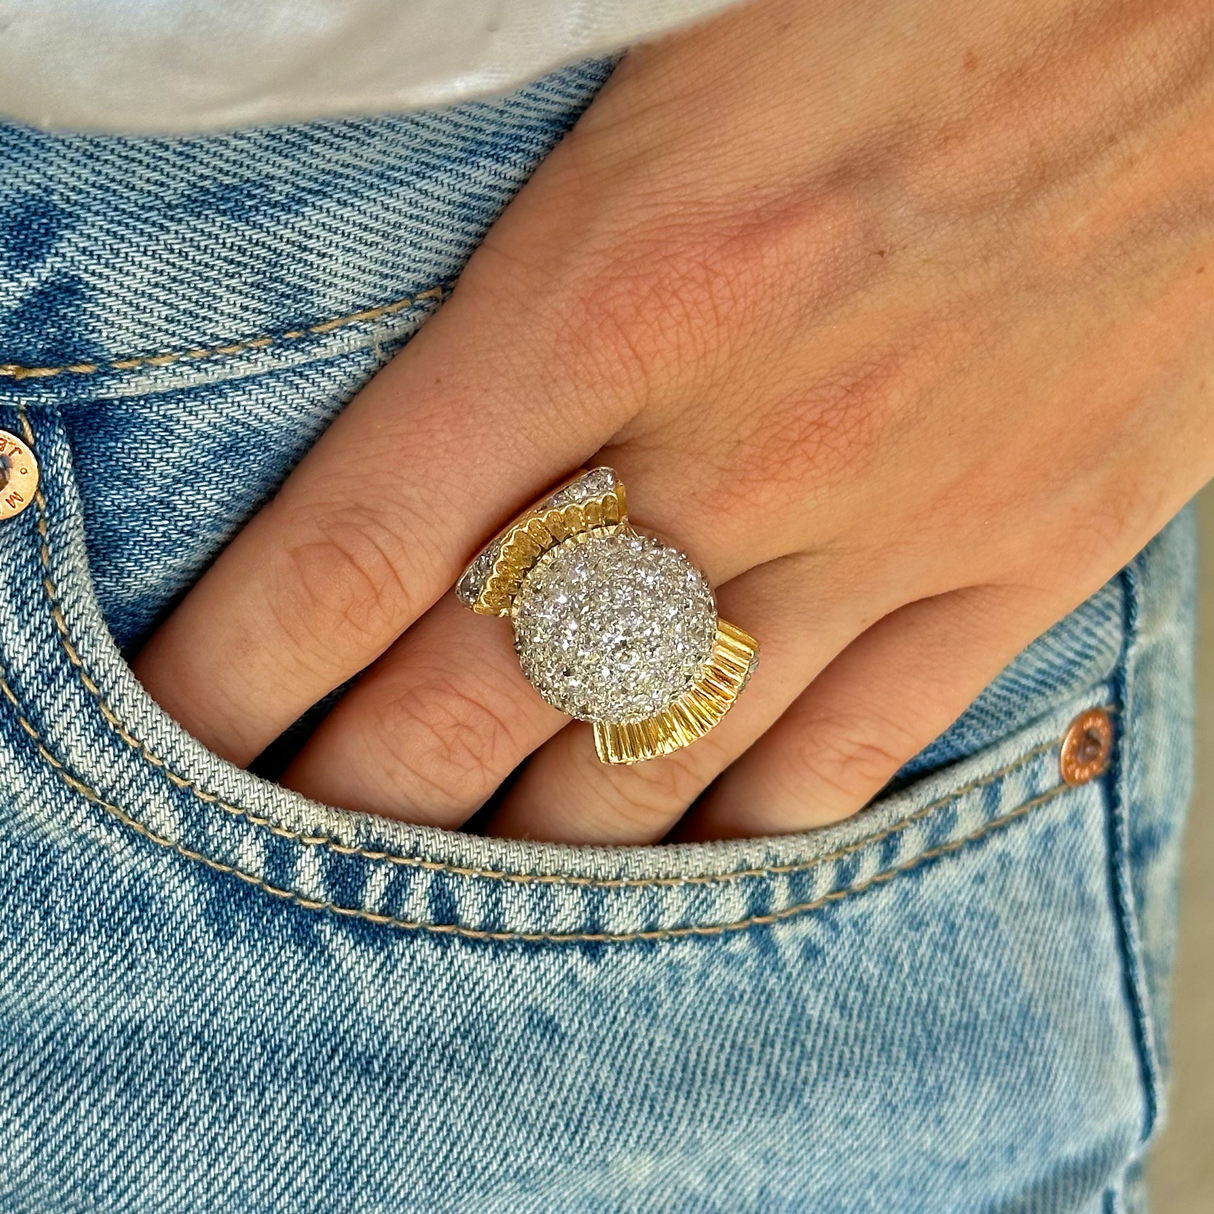 Cartier diamond bombe ring,  worn on hand in pocket of jeans.